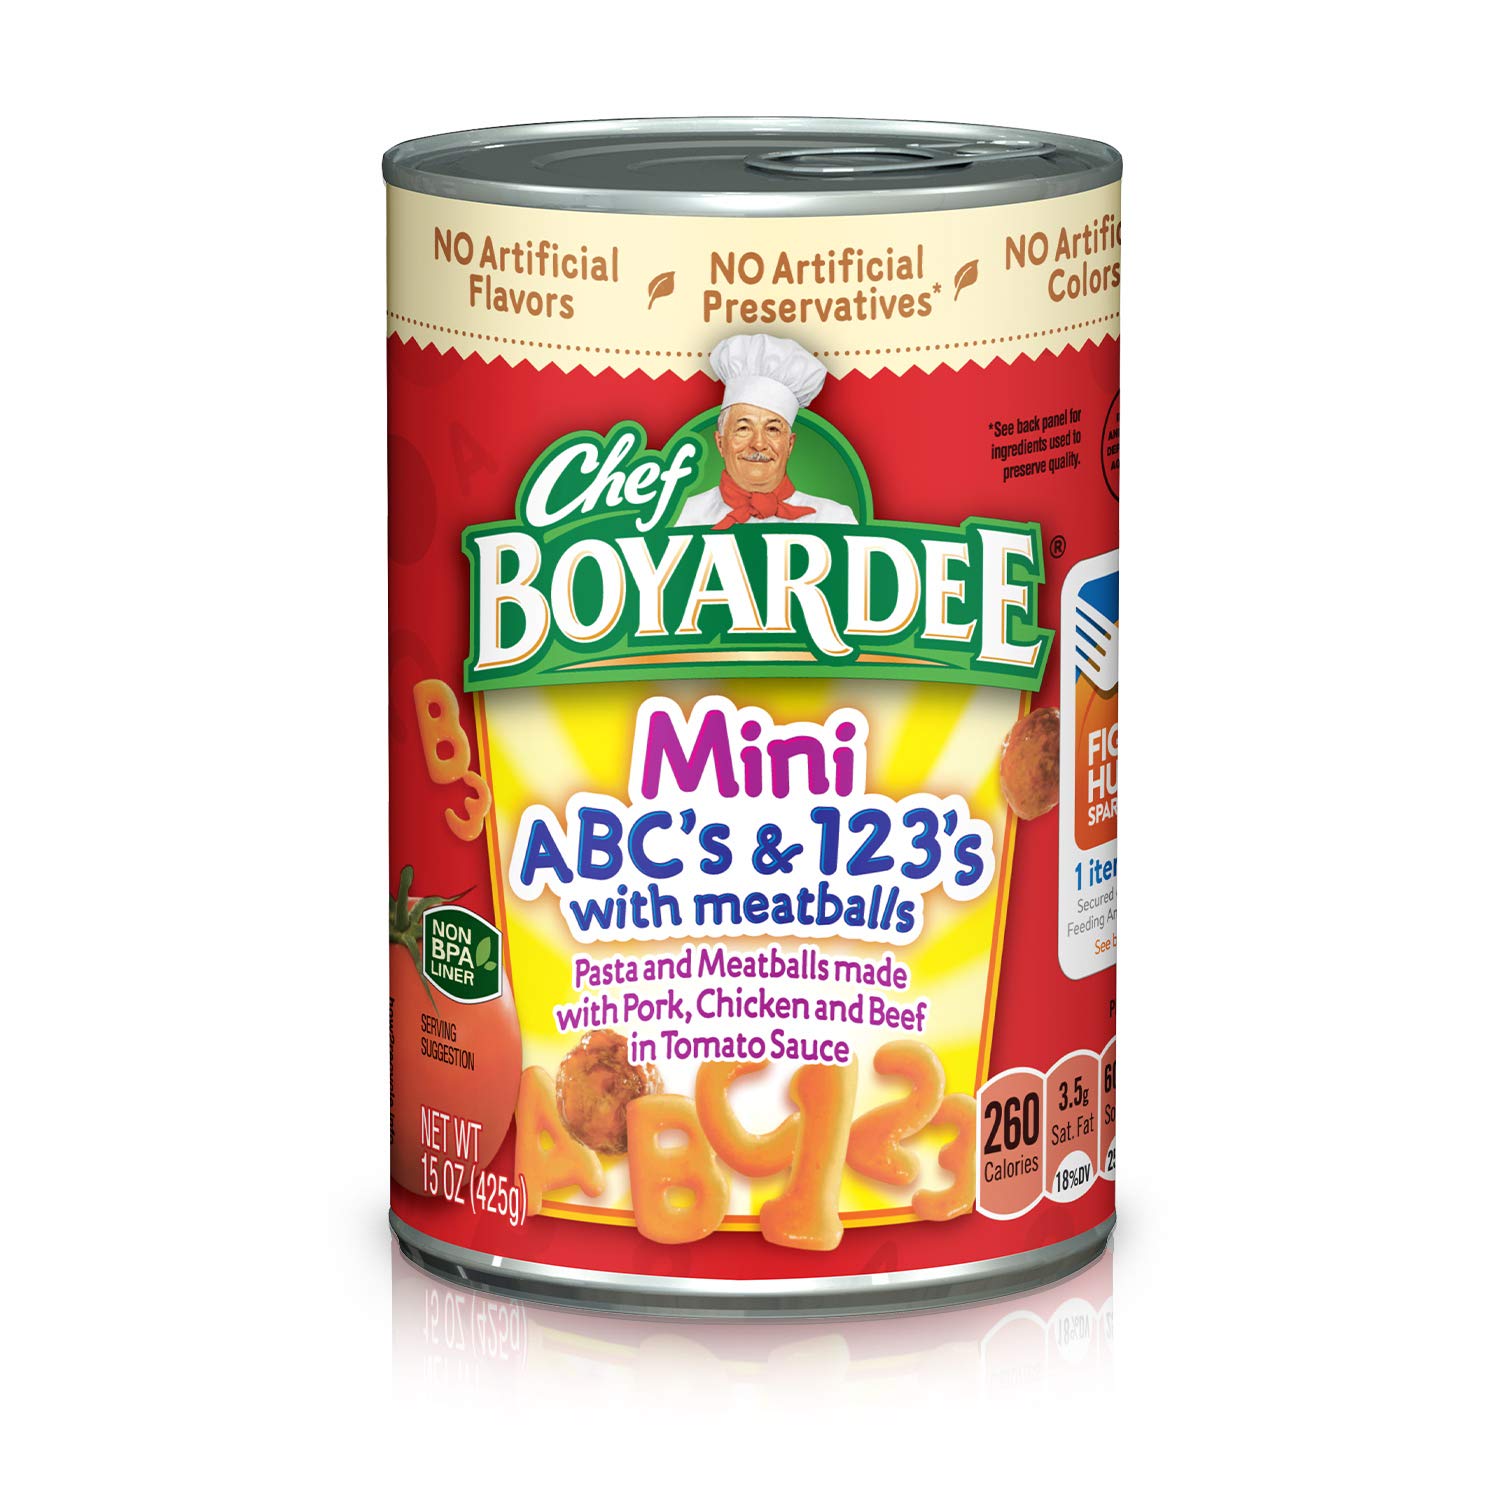 15-Oz 4-Pack Chef Boyardee Mini ABC's and 123's w/ Meatballs $3.31 w/ S&S + Free Shipping w/ Prime or on orders over $25